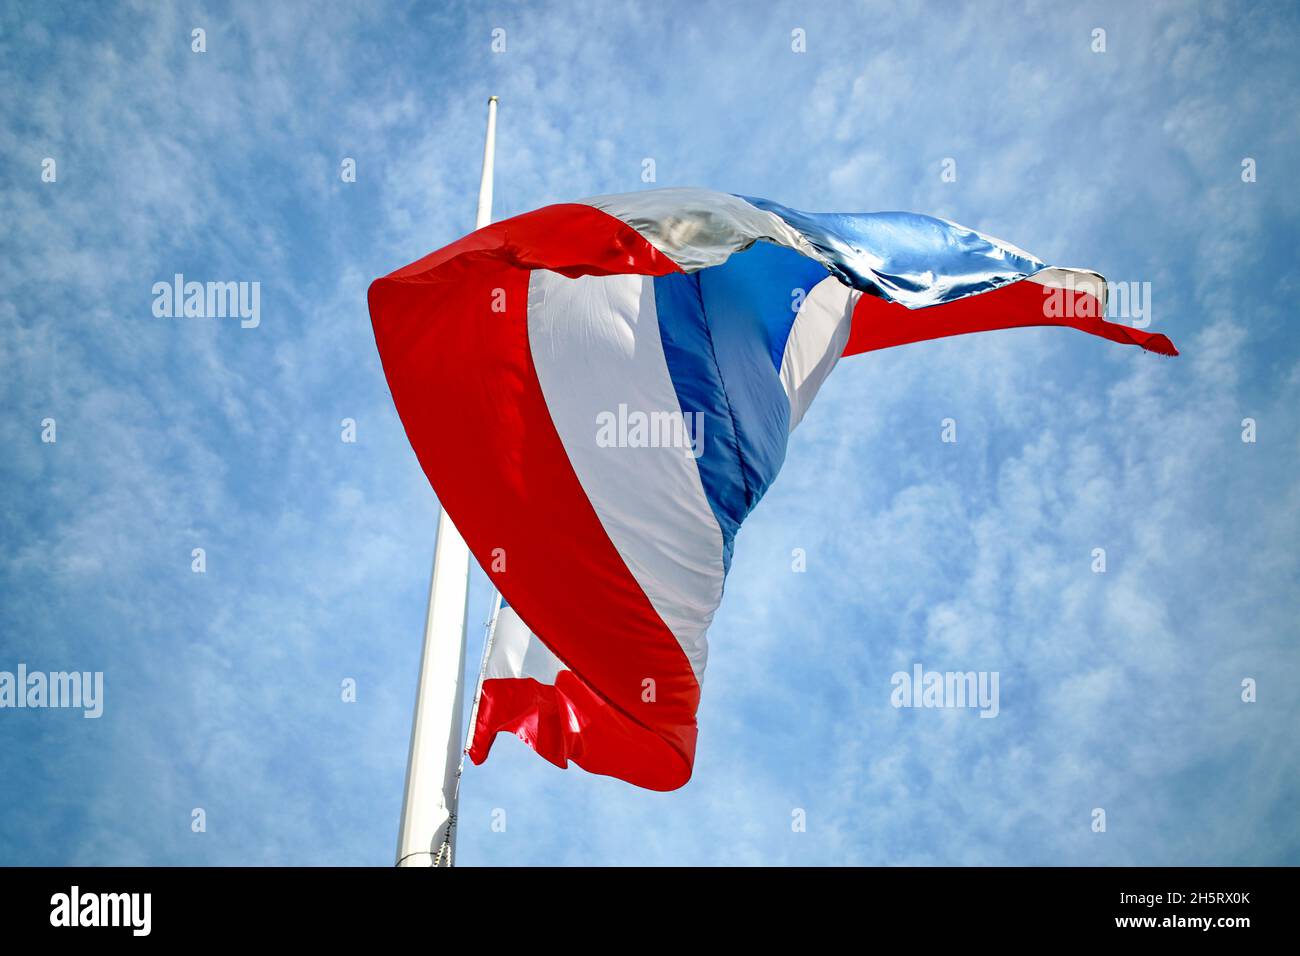 The flag of Thailand fluttering, viewed from an upward angle, seeing the sky in the background on a sunny day. Selective focus. Stock Photo